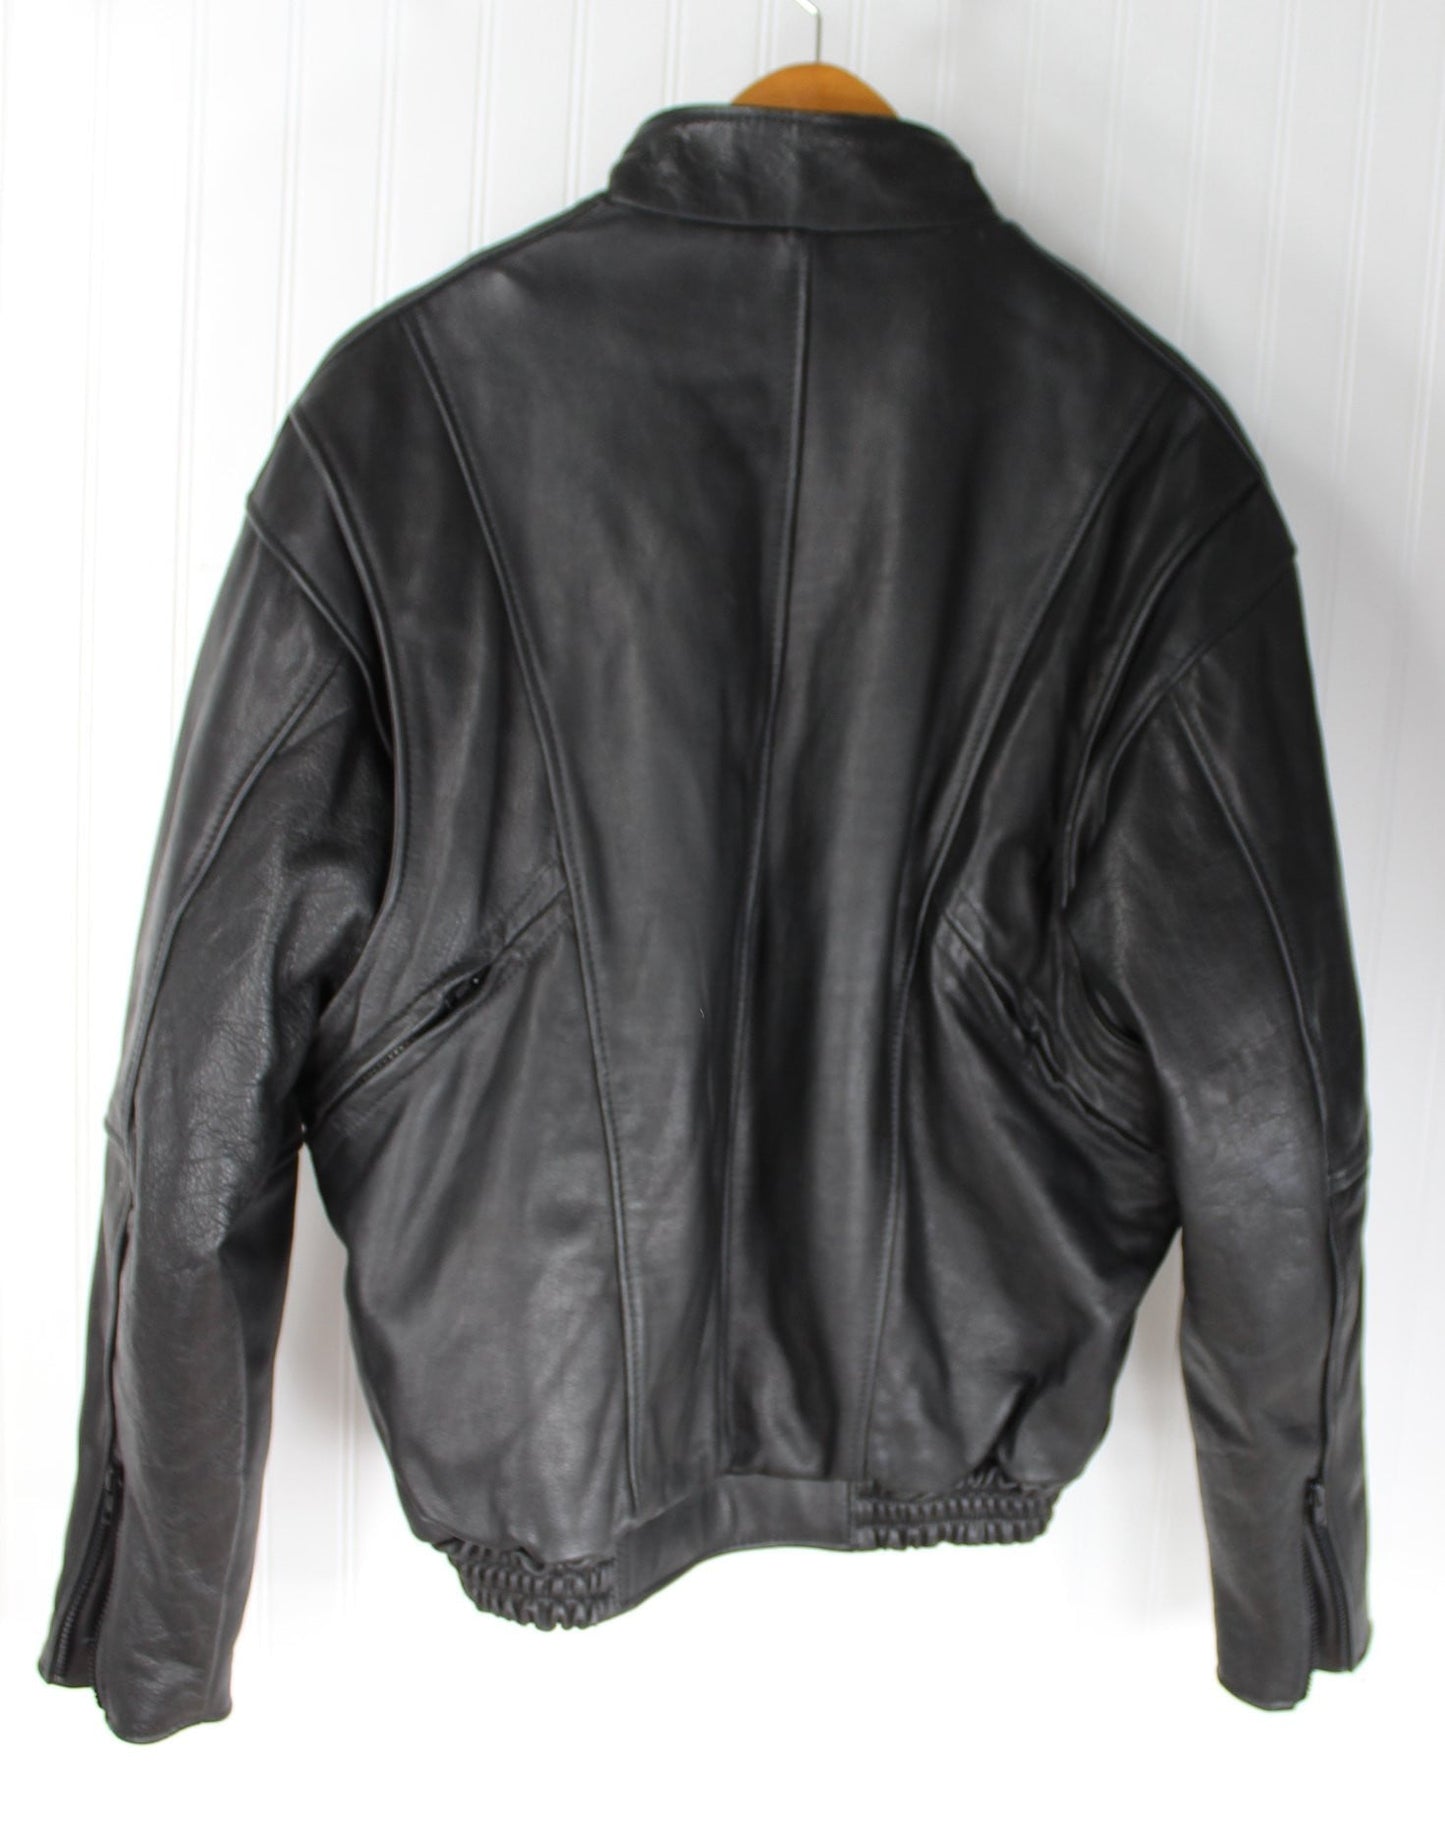 Protech USA Performance Leather Black Motorcycle Jacket M Vintage - Thinsulate Lining  many zippers